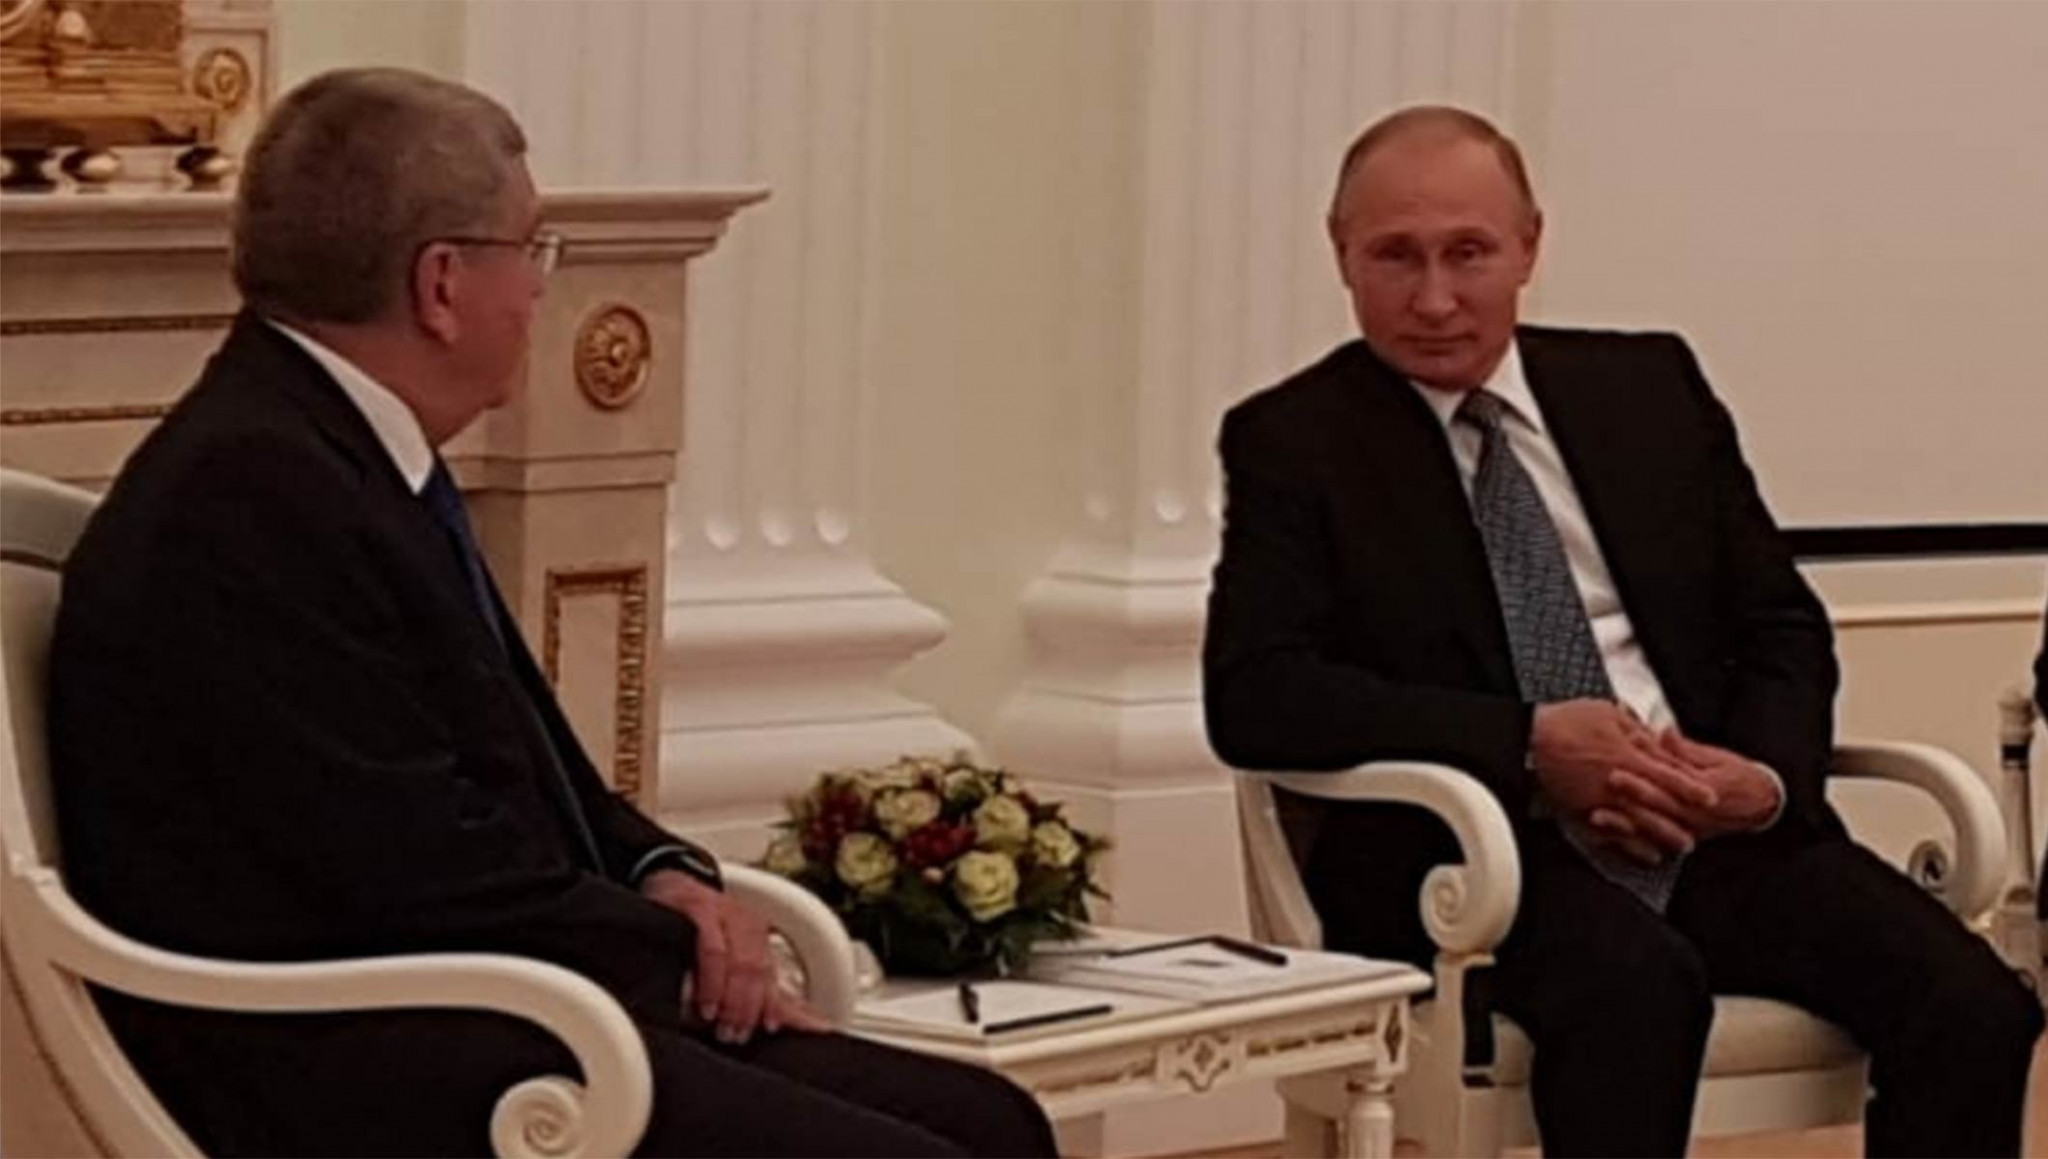 Bach meets Putin at World Cup Final and claims Russian sport should be brought back into fold